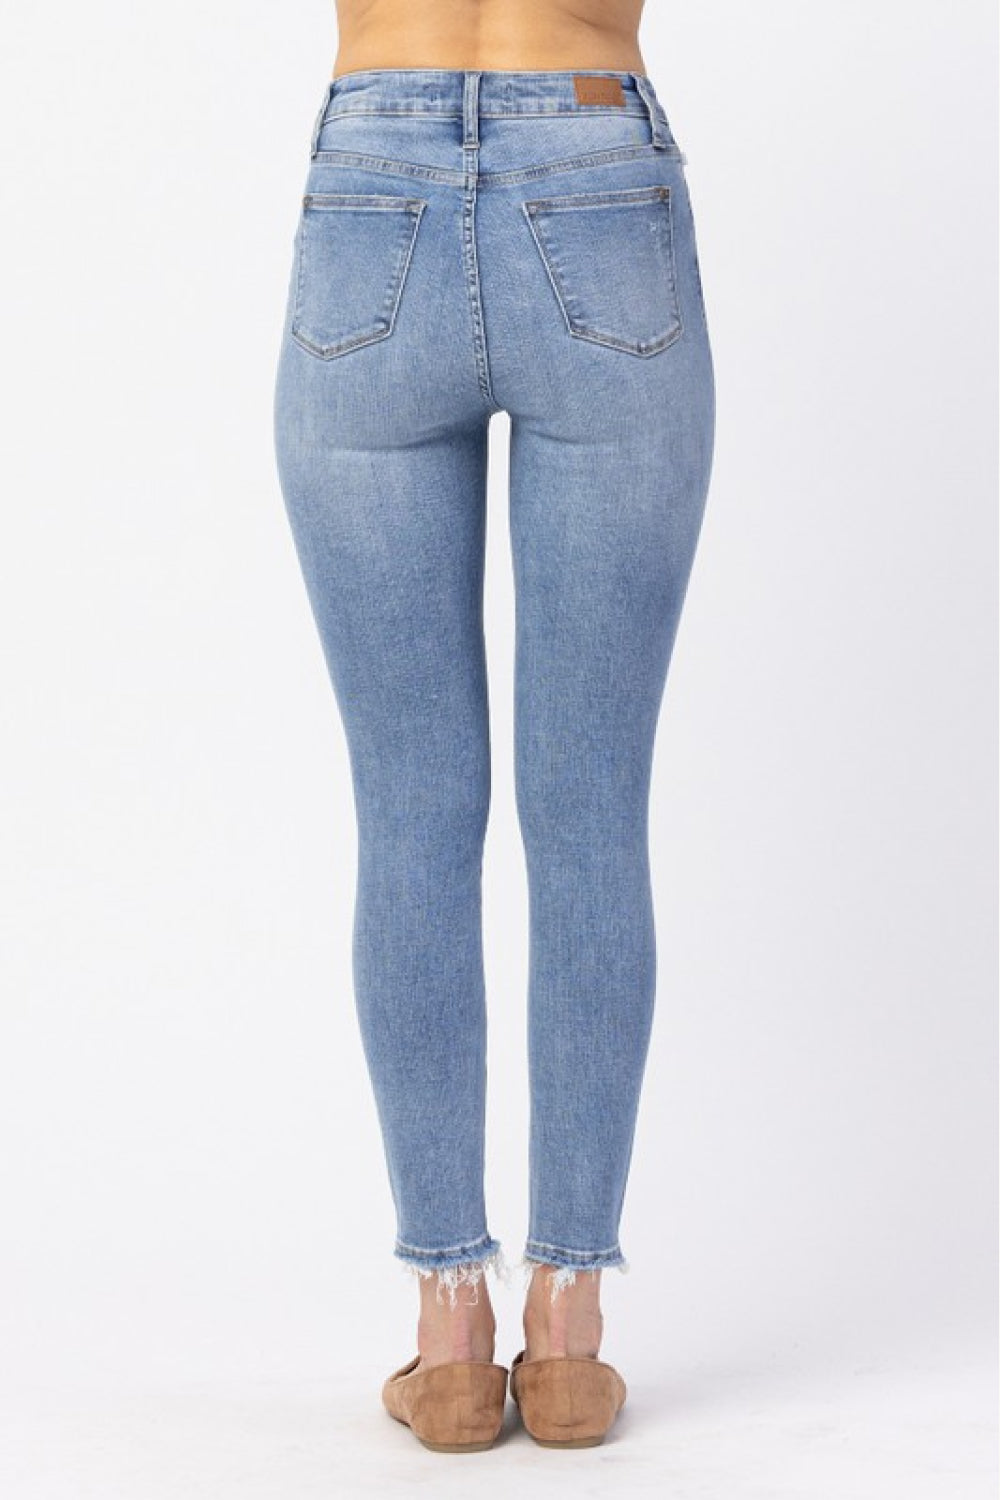 Judy Blue Full Size Button Fly Raw Hem Jeans - Cheeky Chic Boutique